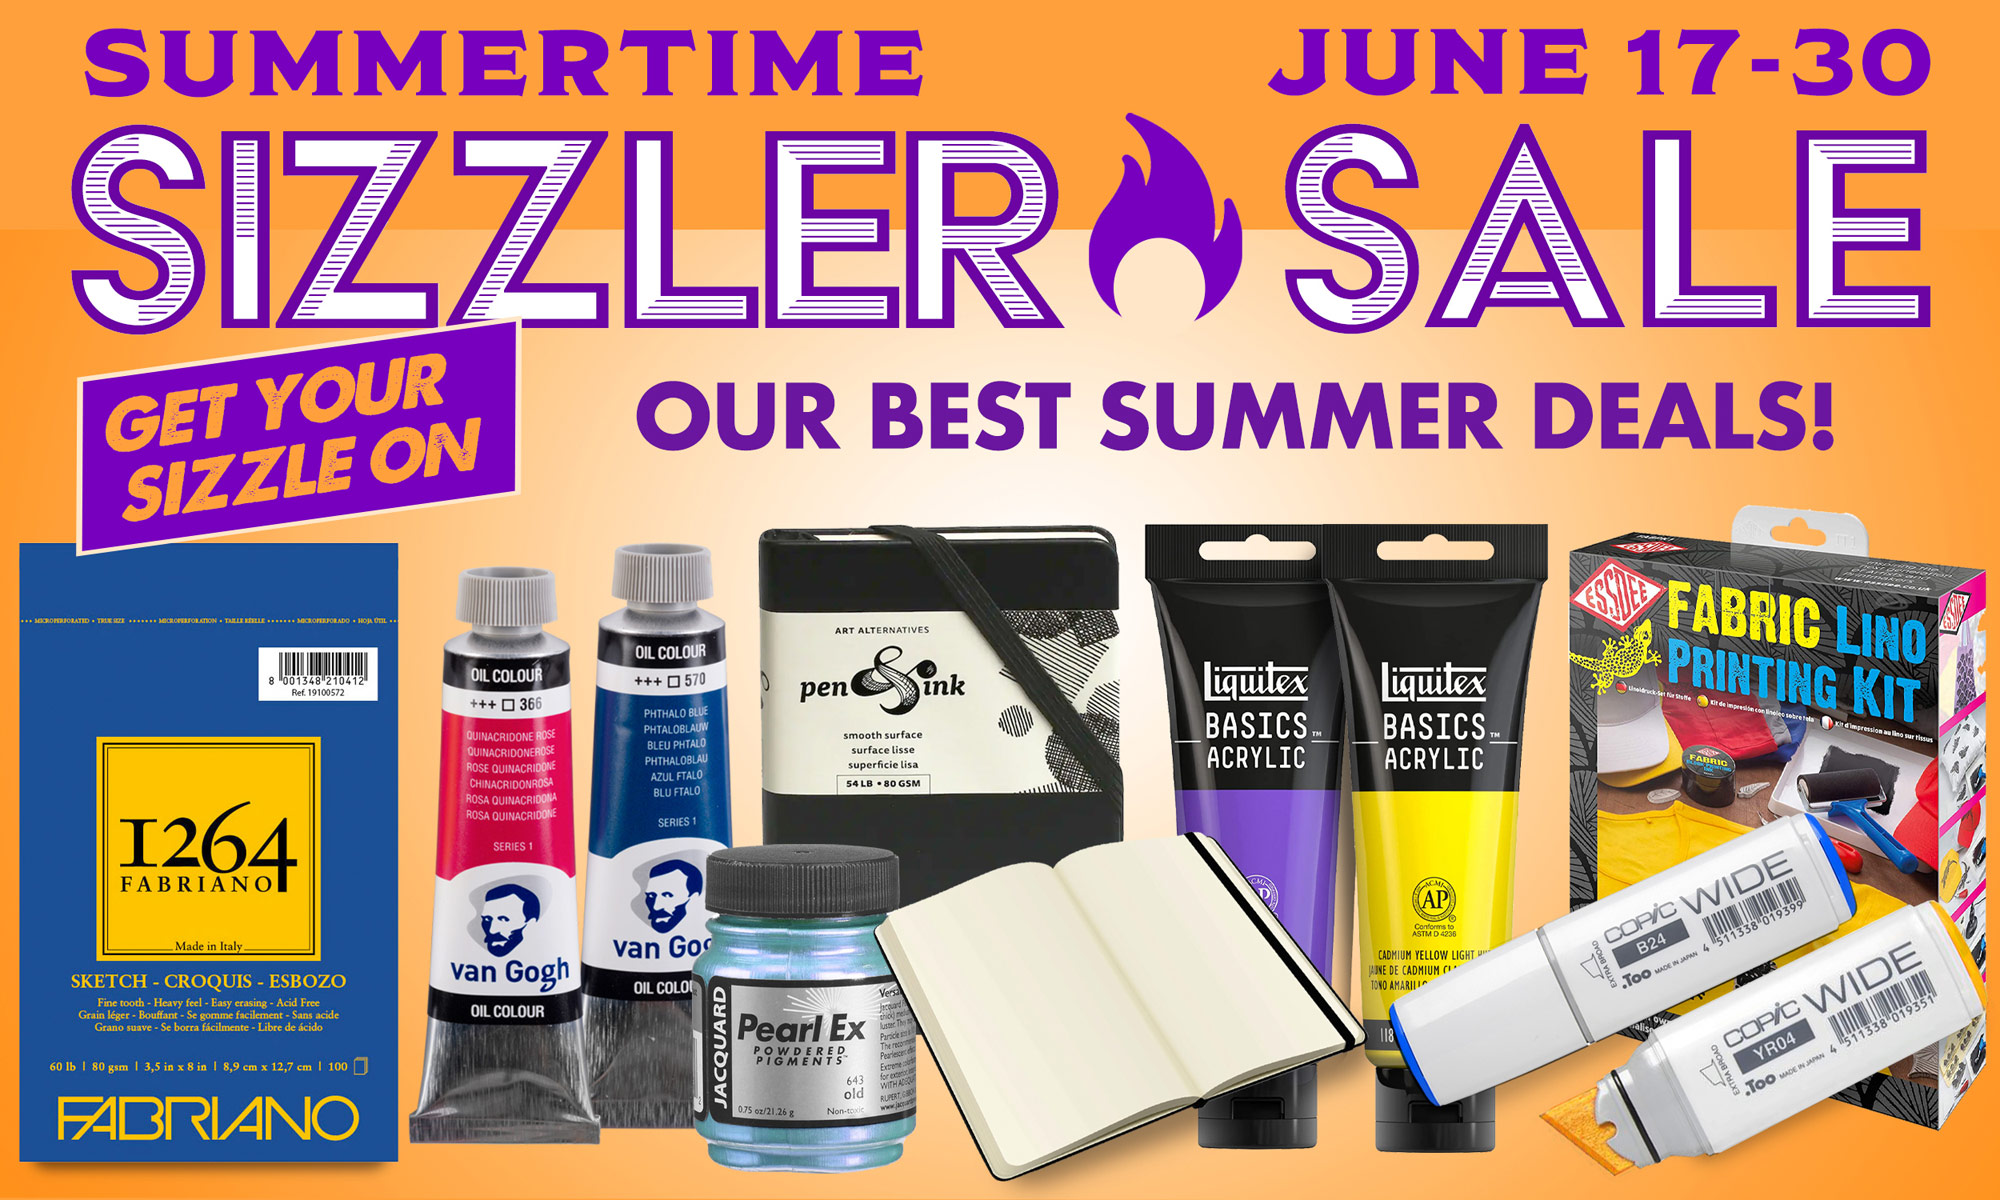 Summertime Sizzling Sale